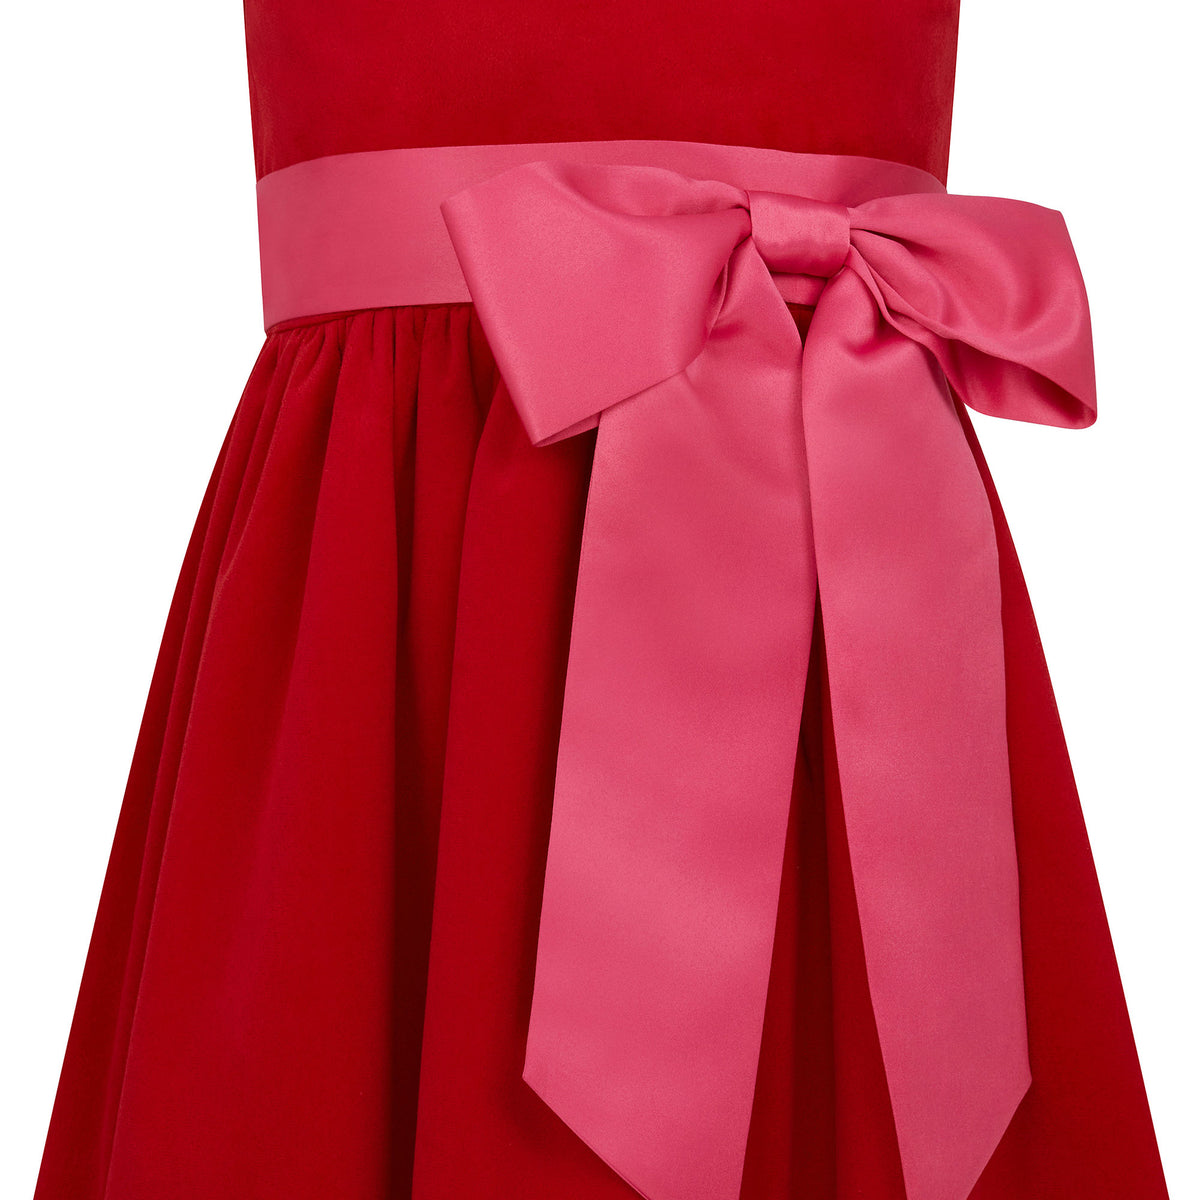 Lilibet Girls Party Dress Red & Pink | Holly Hastie London